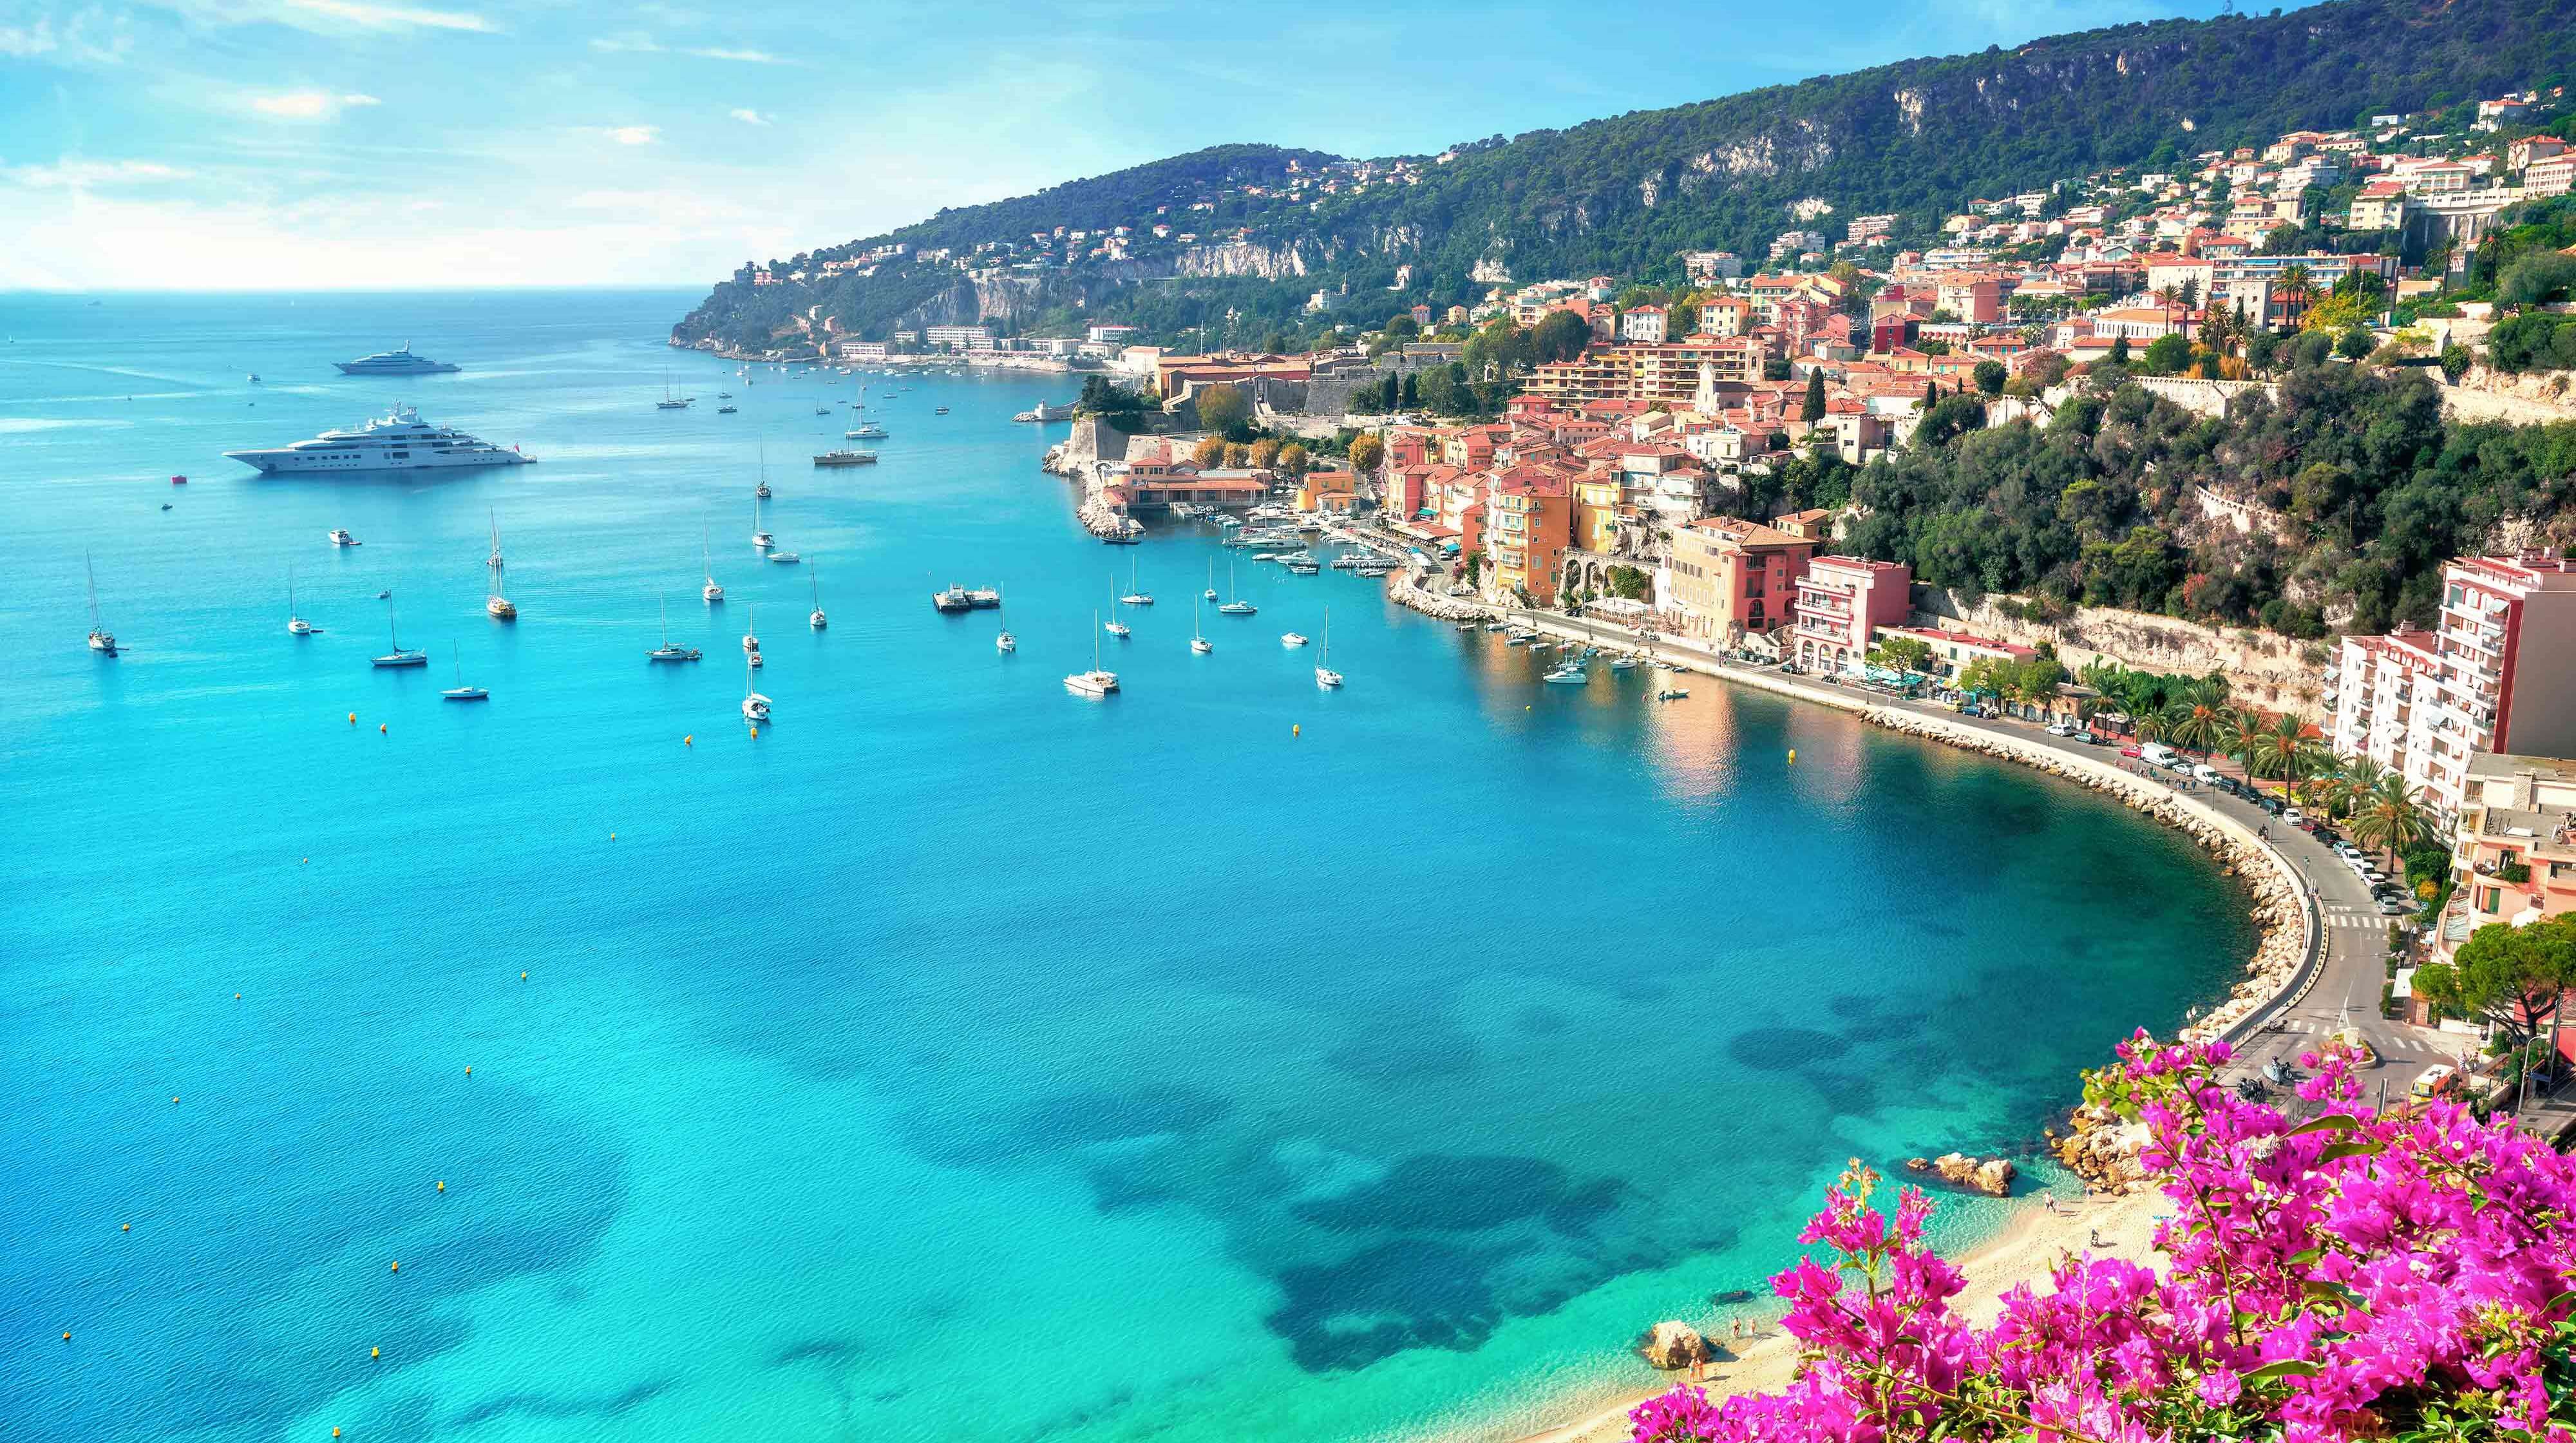 french riviera tours